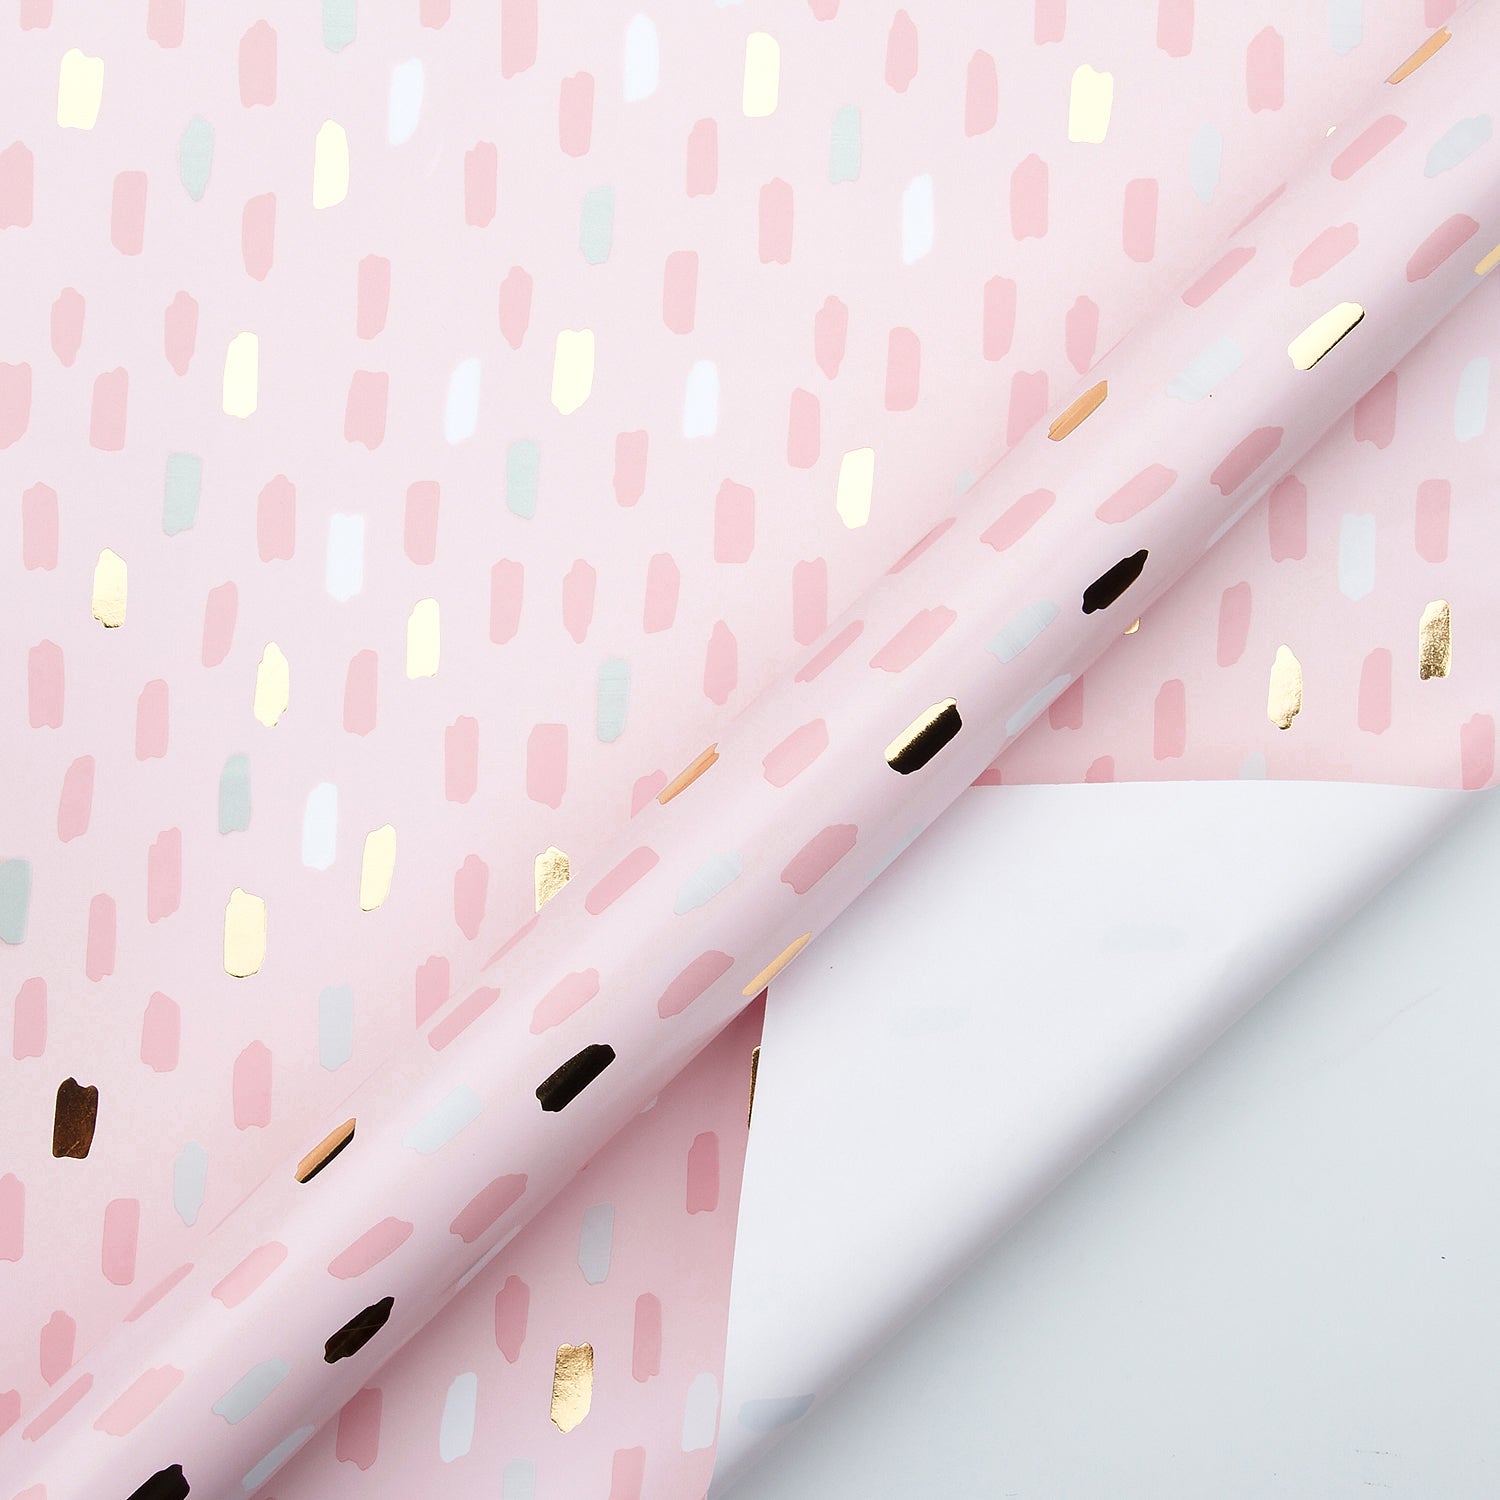 Wrapping Paper Roll- Pink and Gold Foil Brushstroke Design - 30inch x 16.5 Feet